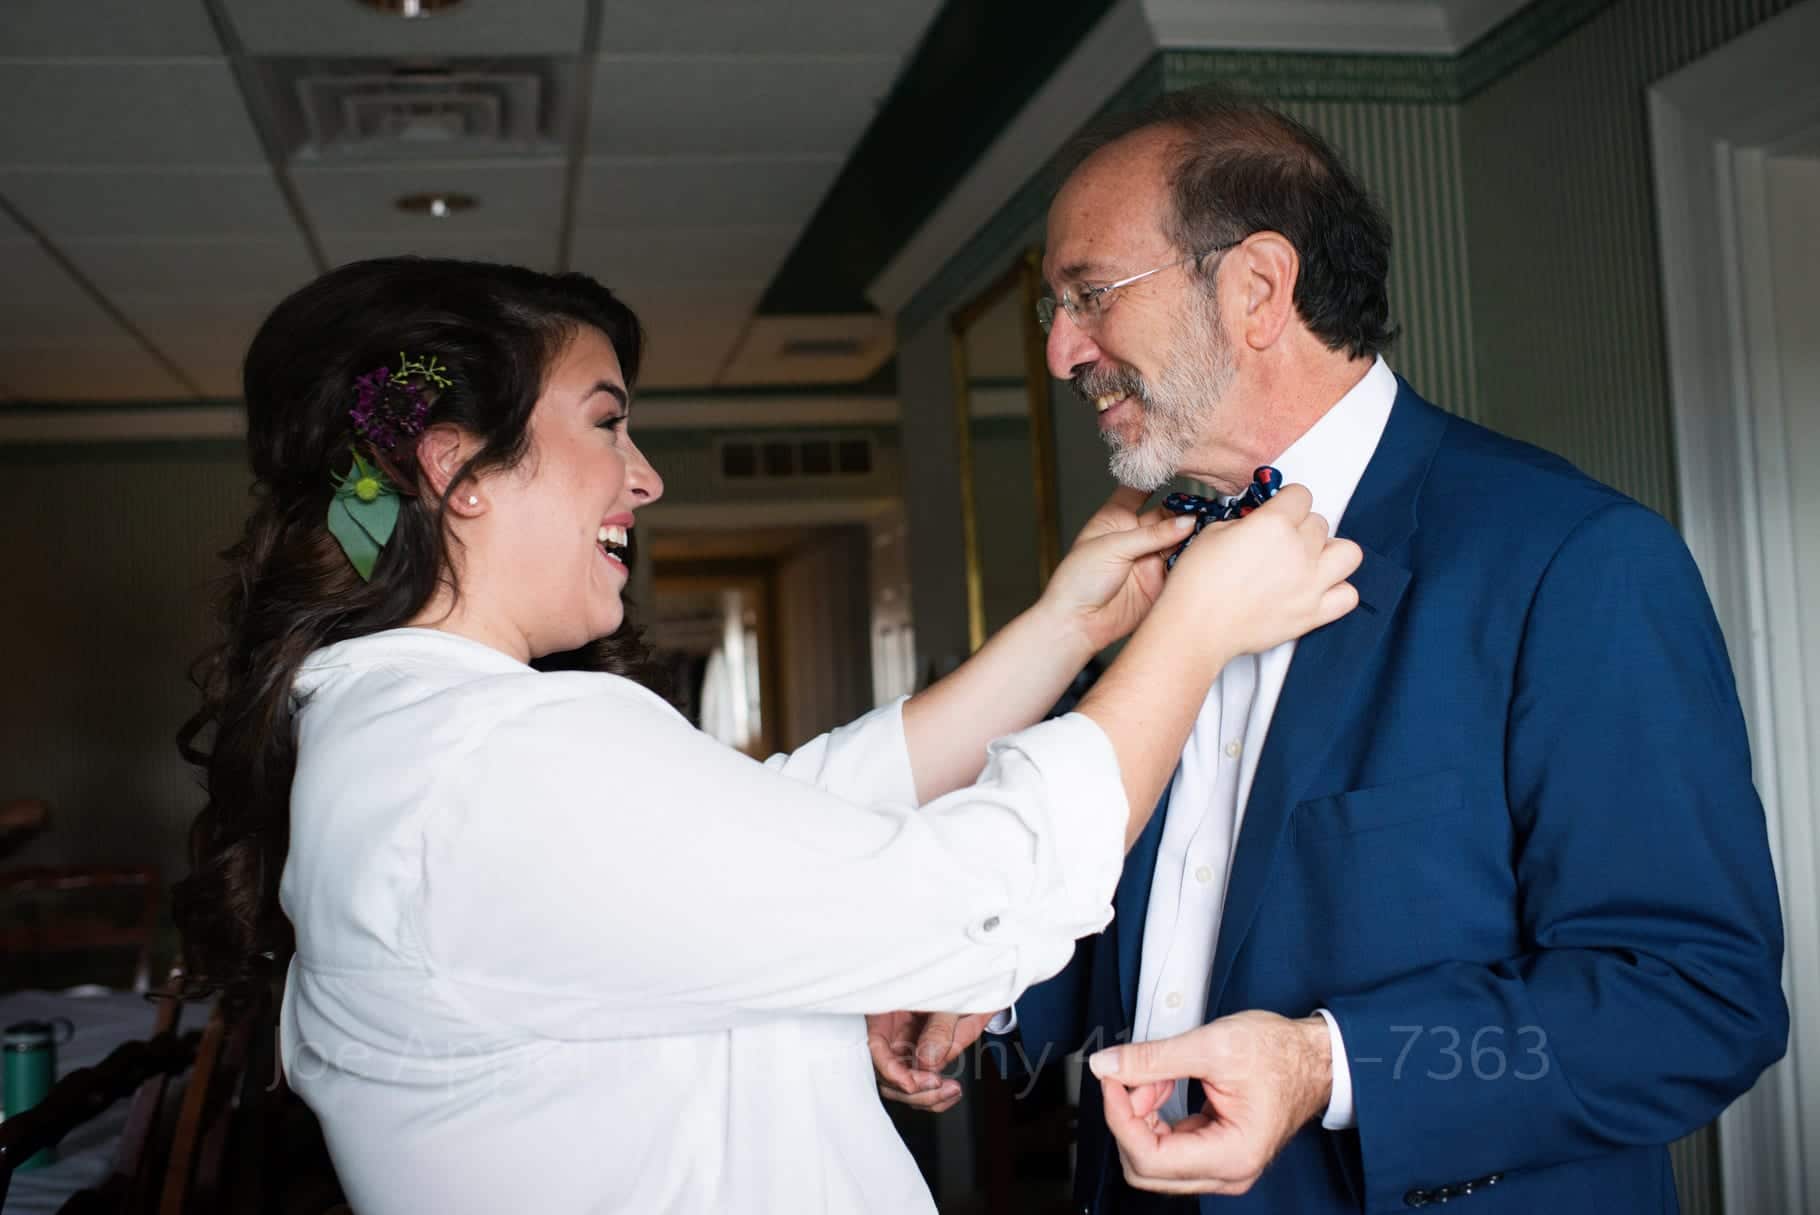 A young woman wearing a white bathrobe adjusts her father's bow tie as they smile at one another.